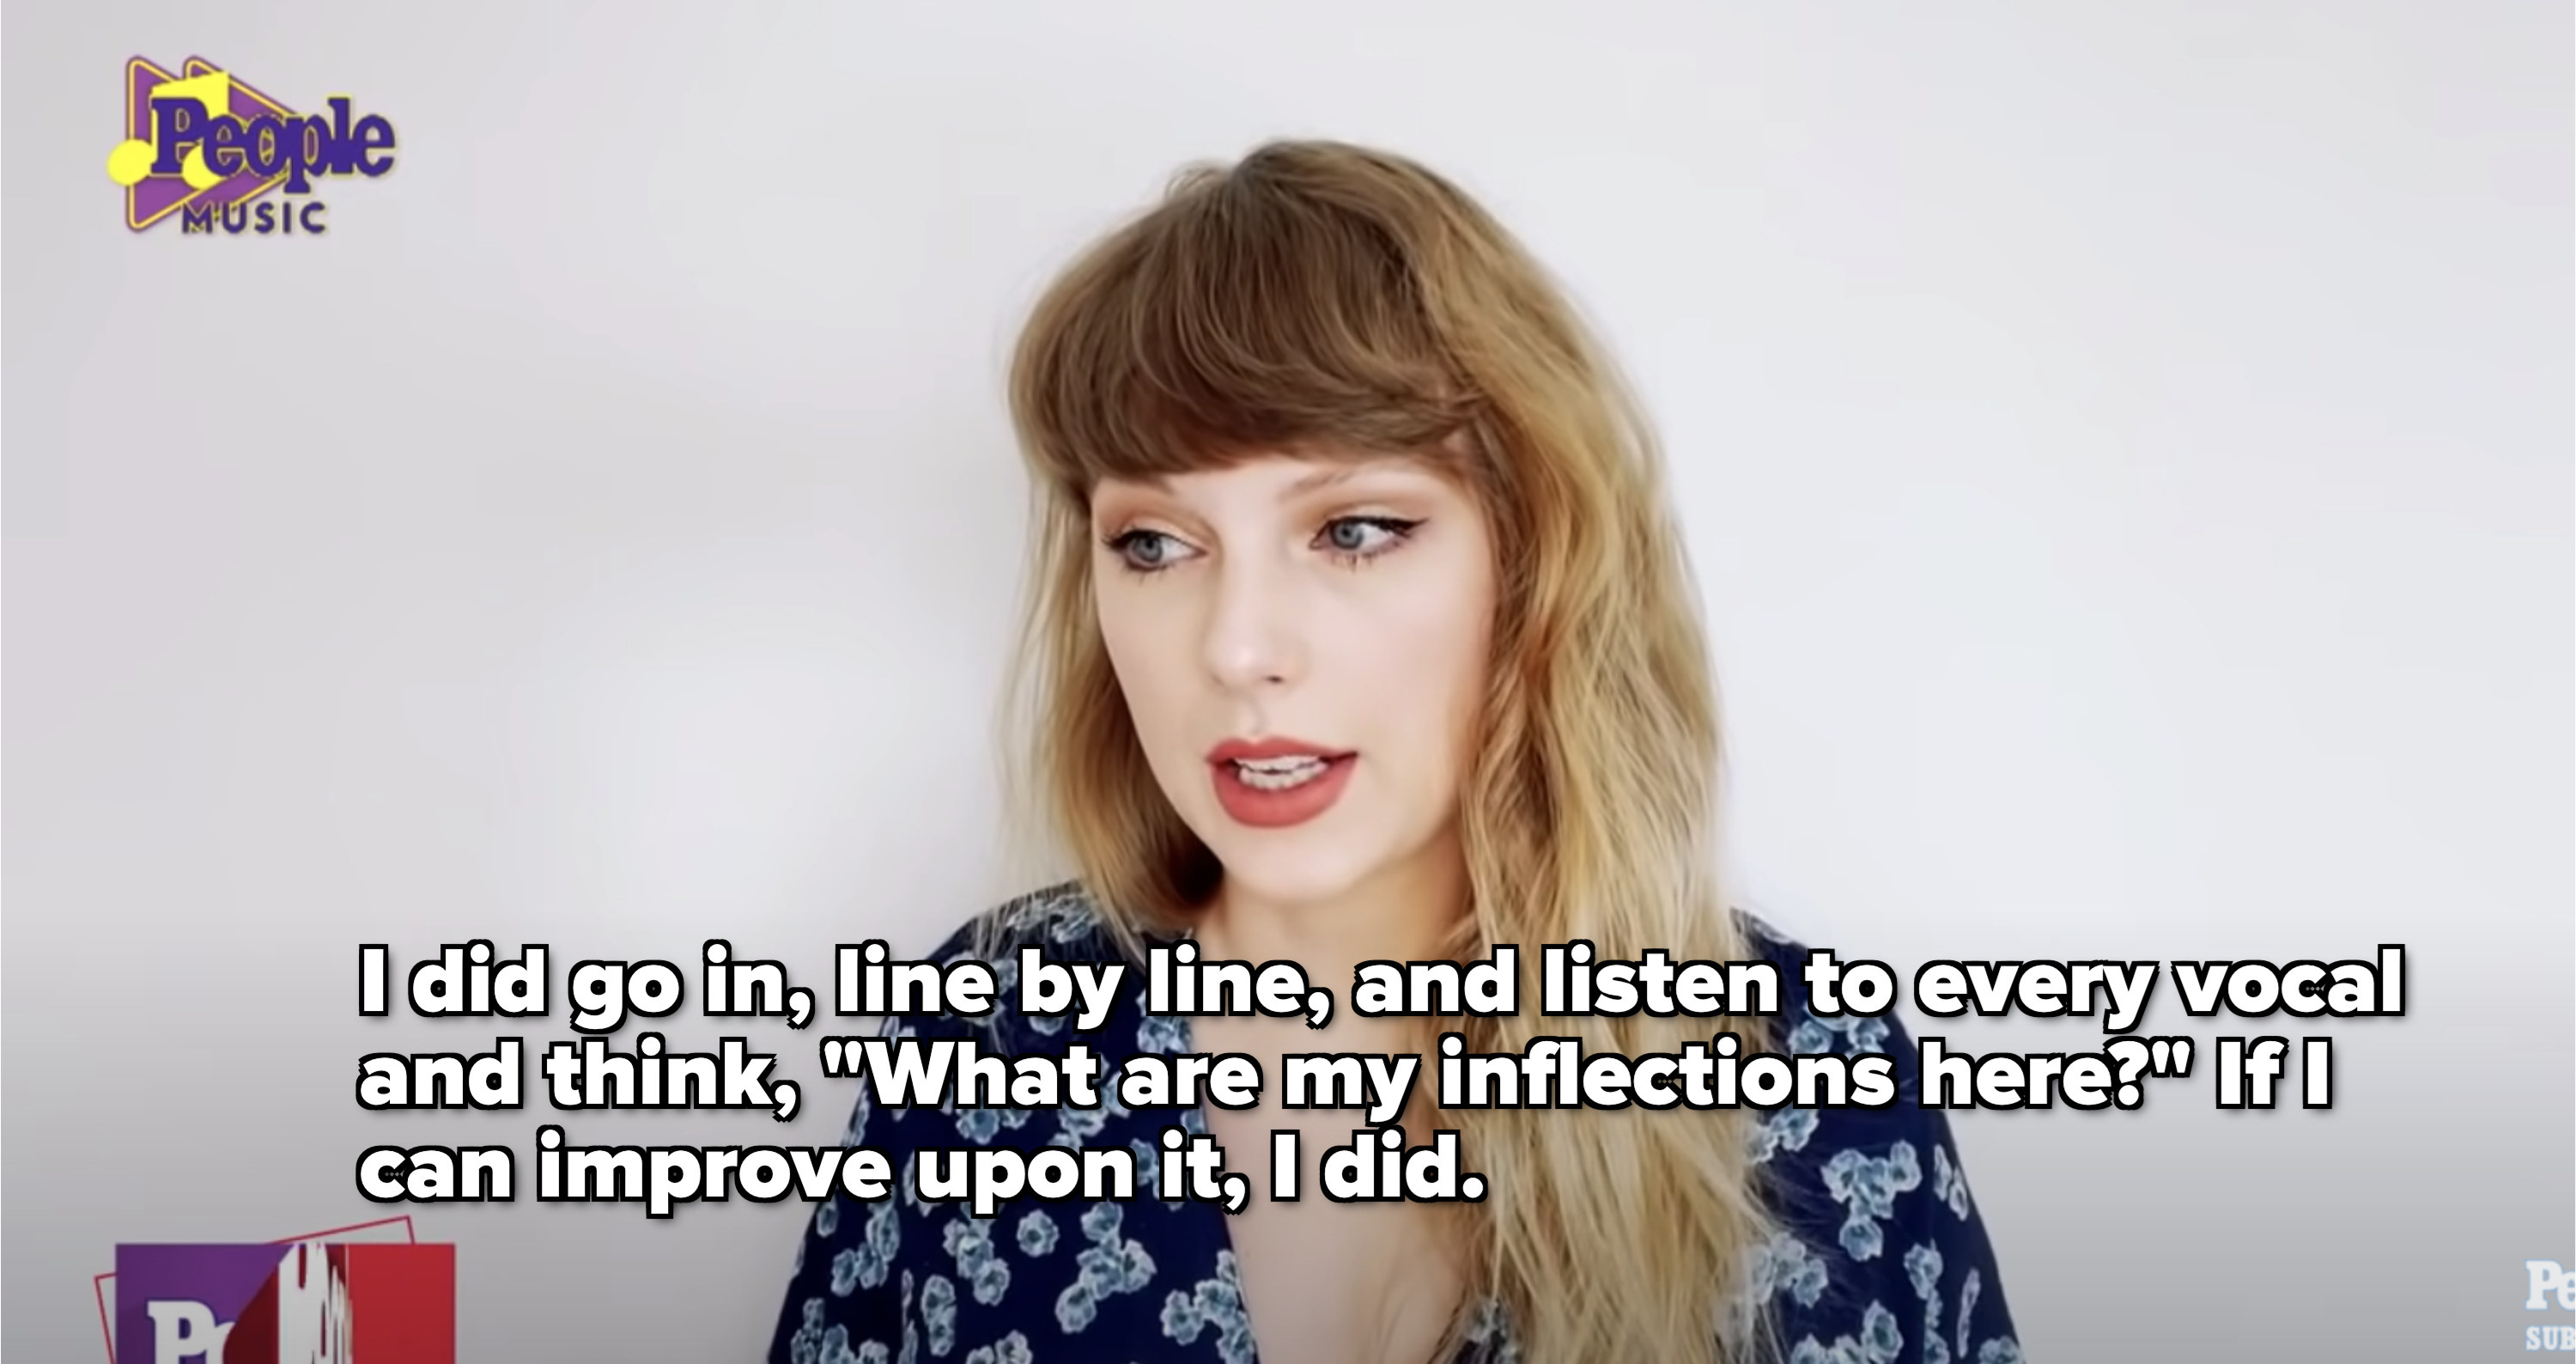 Taylor saying, &quot;I did go in line by line and listen to every vocal and think, &quot;What are my inflections here?&quot; If I can improve upon it, I did